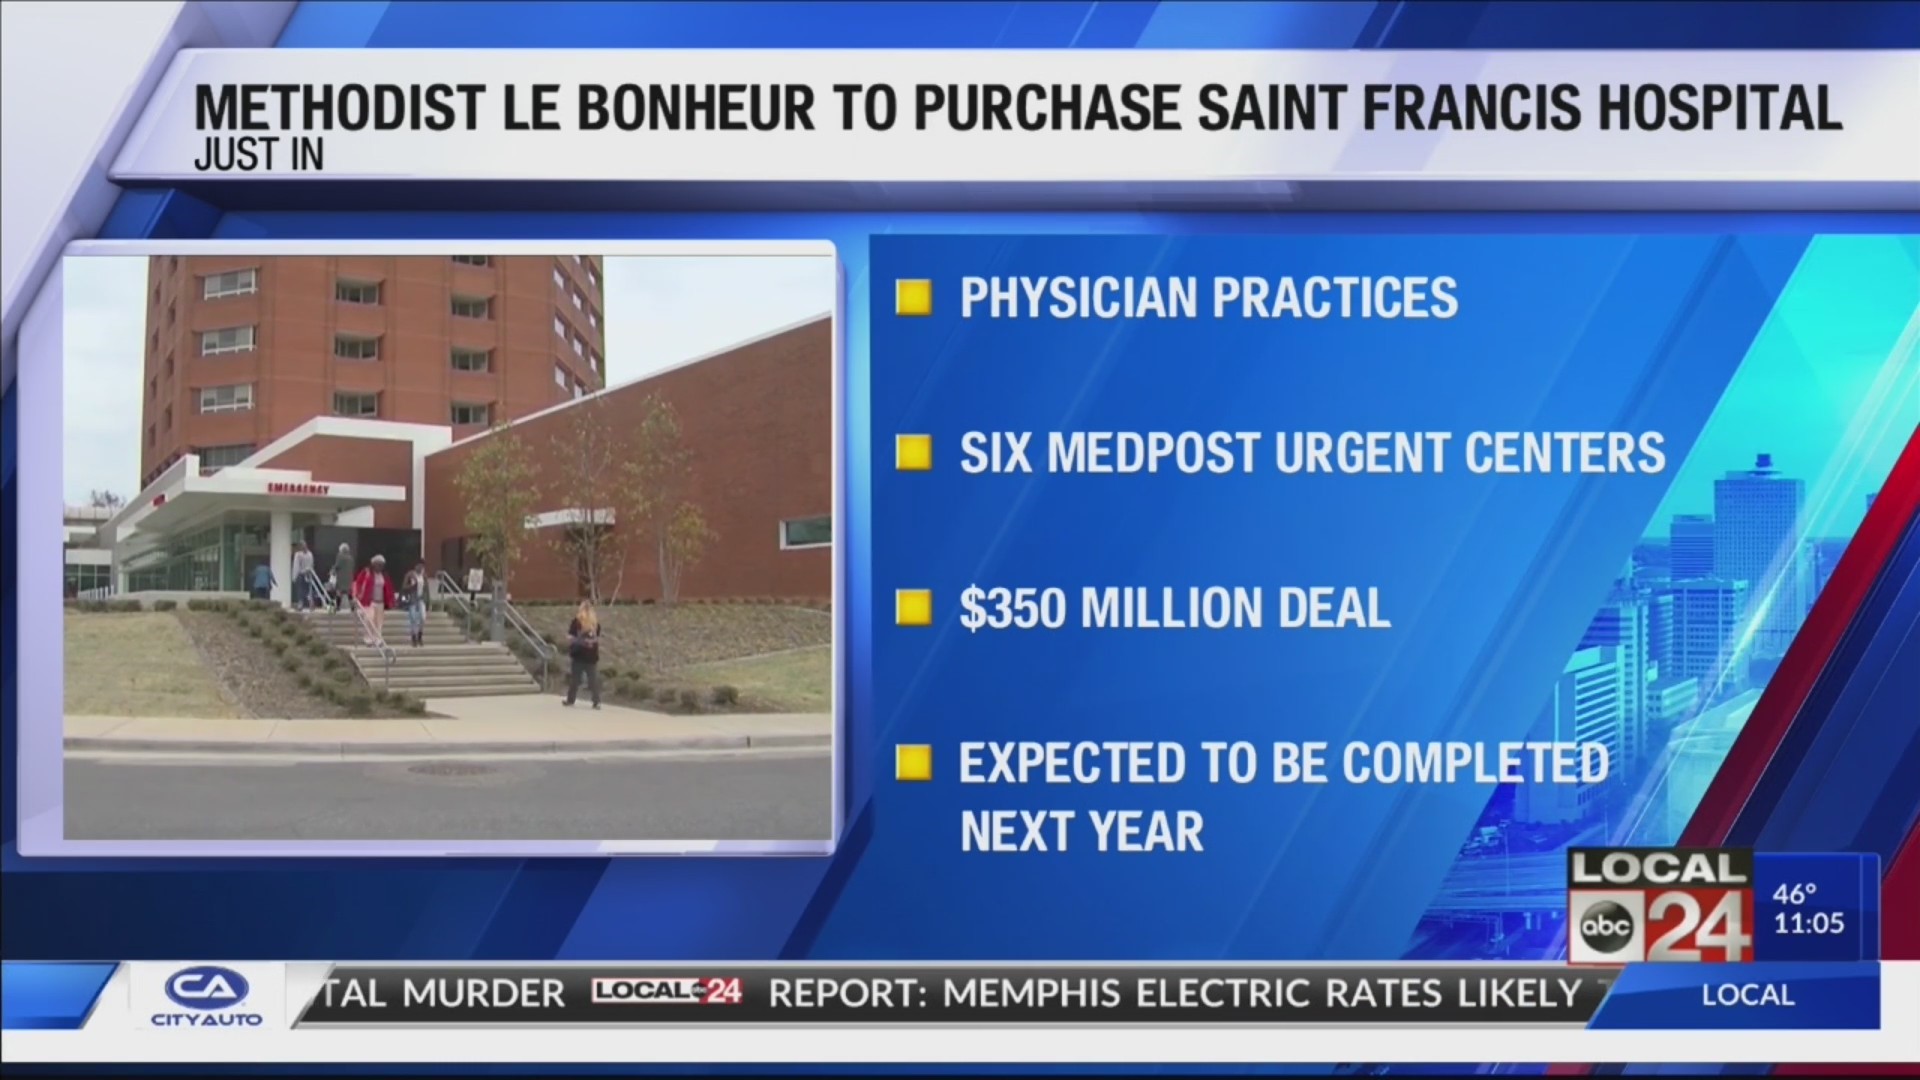 Methodist Le Bonheur Healthcare to purchase Saint Francis Hospitals in Bartlett and Memphis